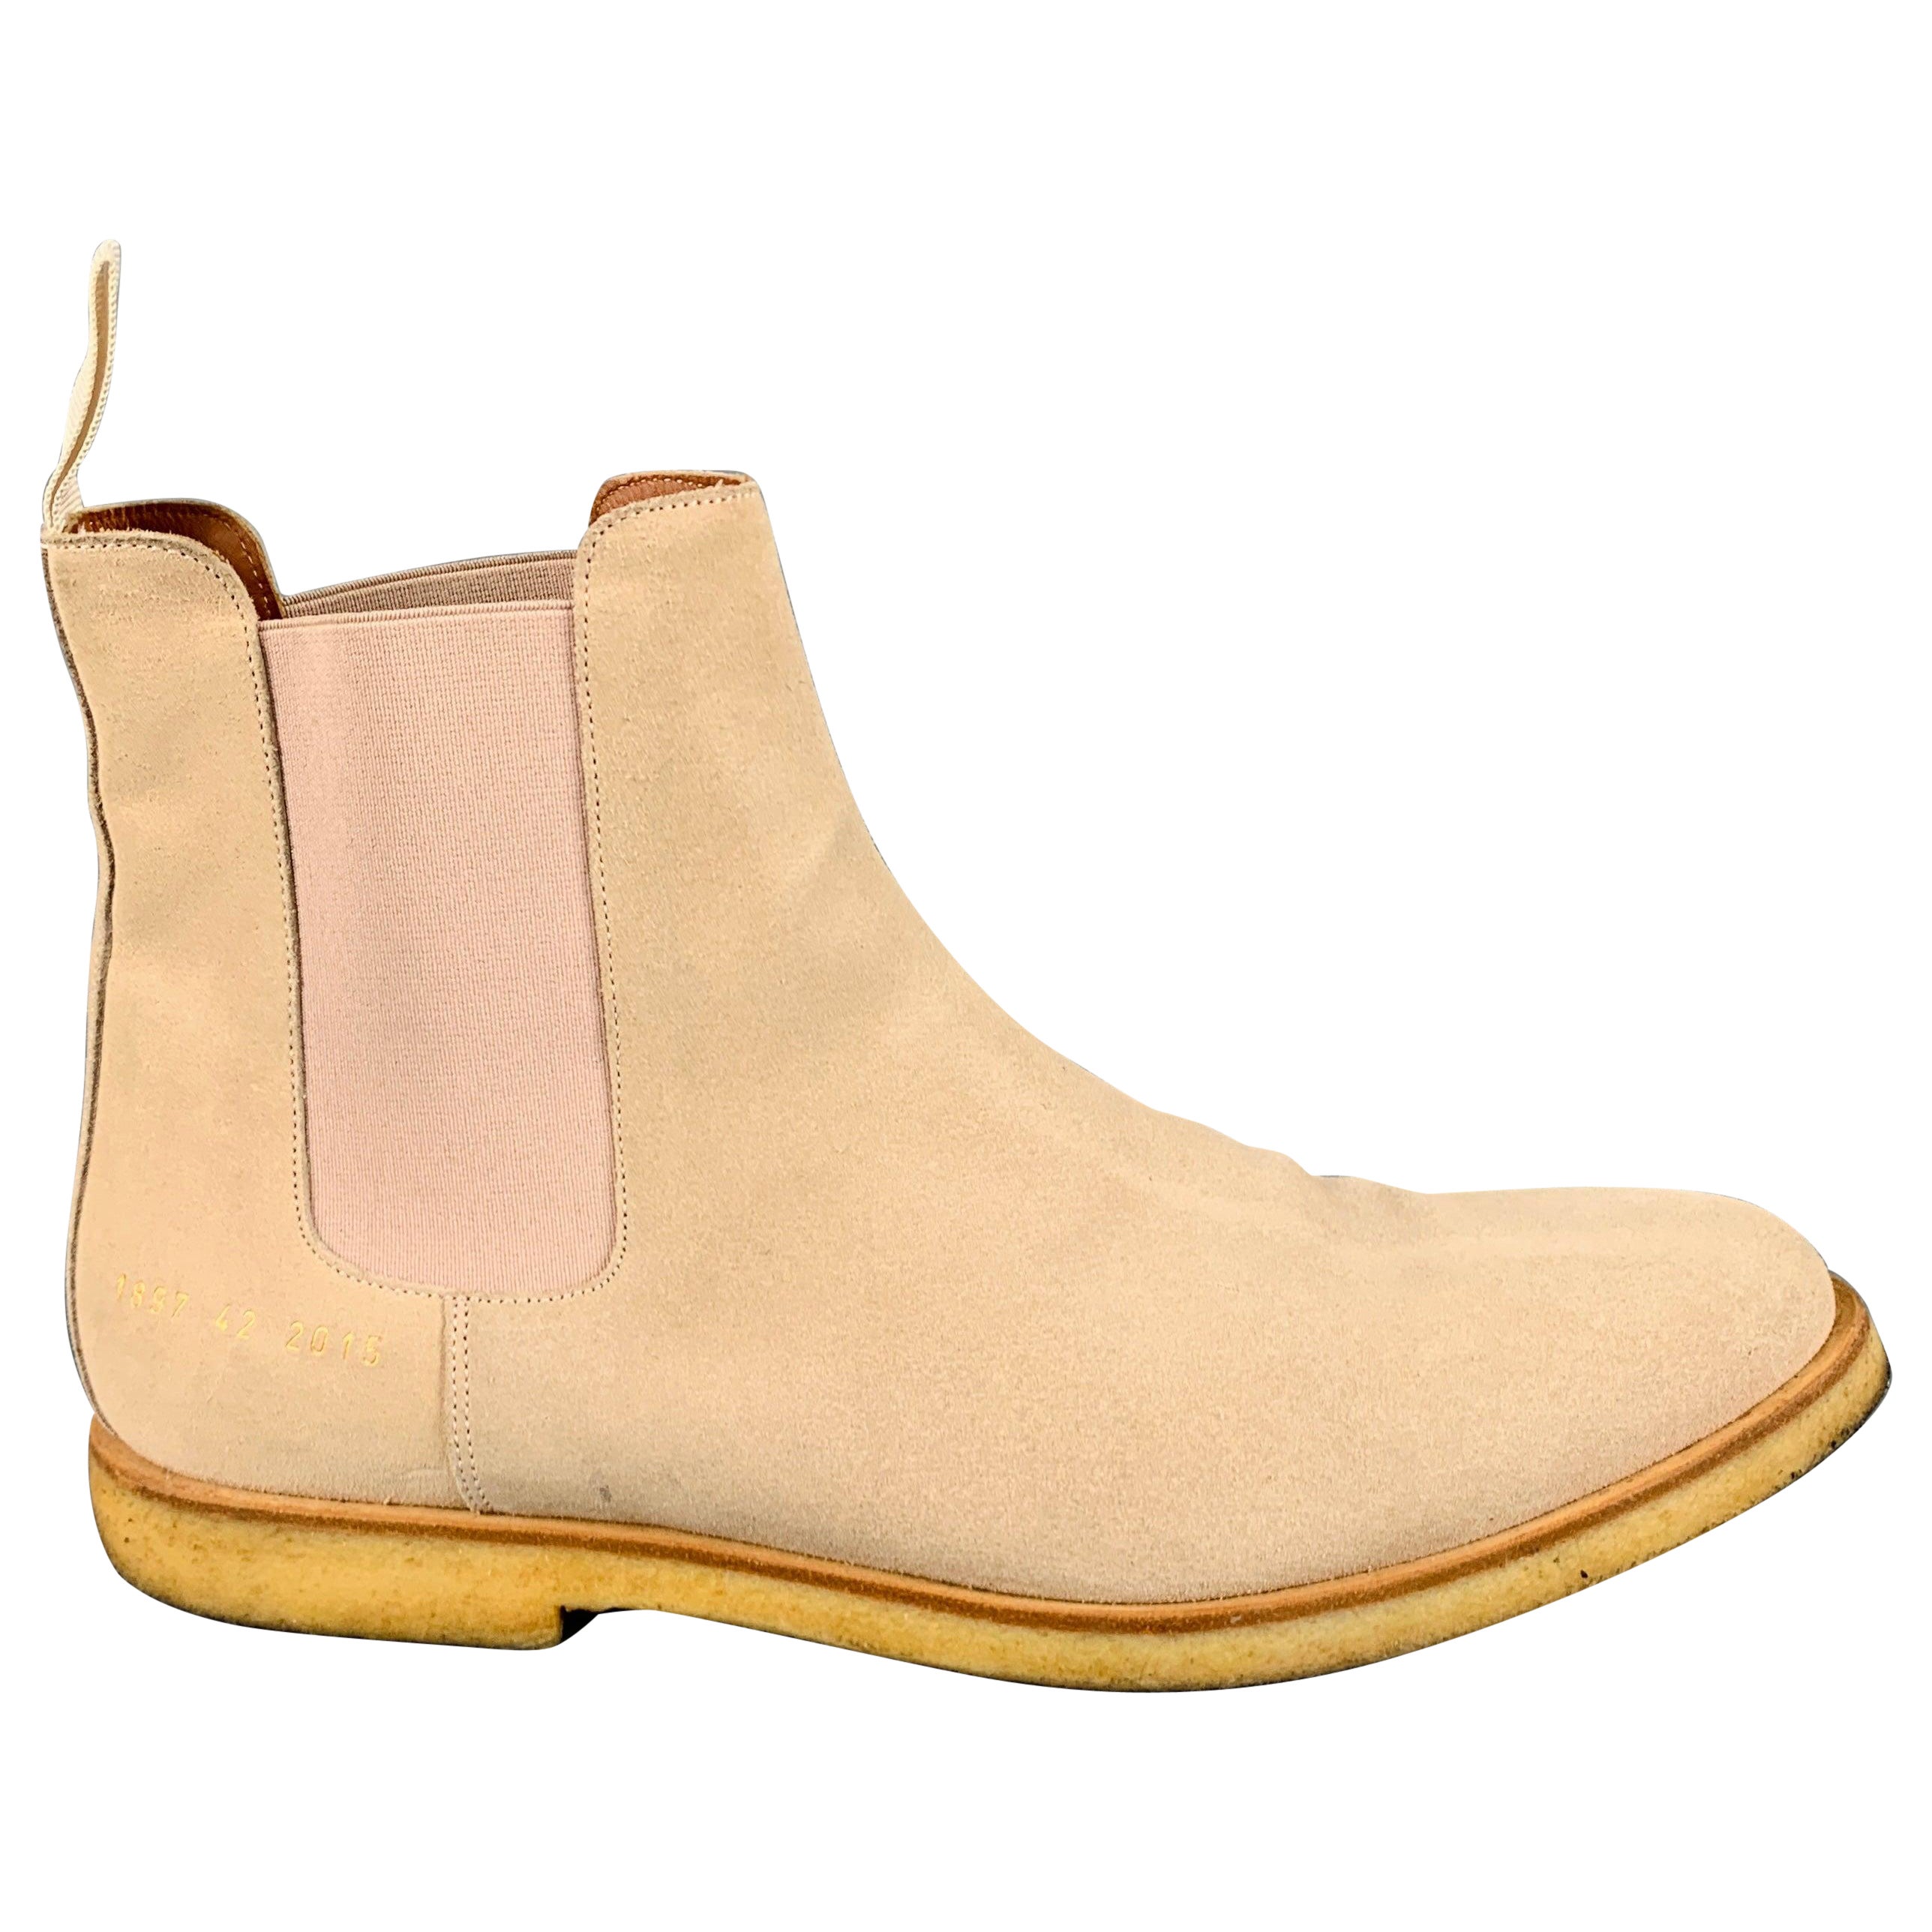 COMMON PROJECTS Size 9 Beige Suede Chelsea Ankle Boots For Sale